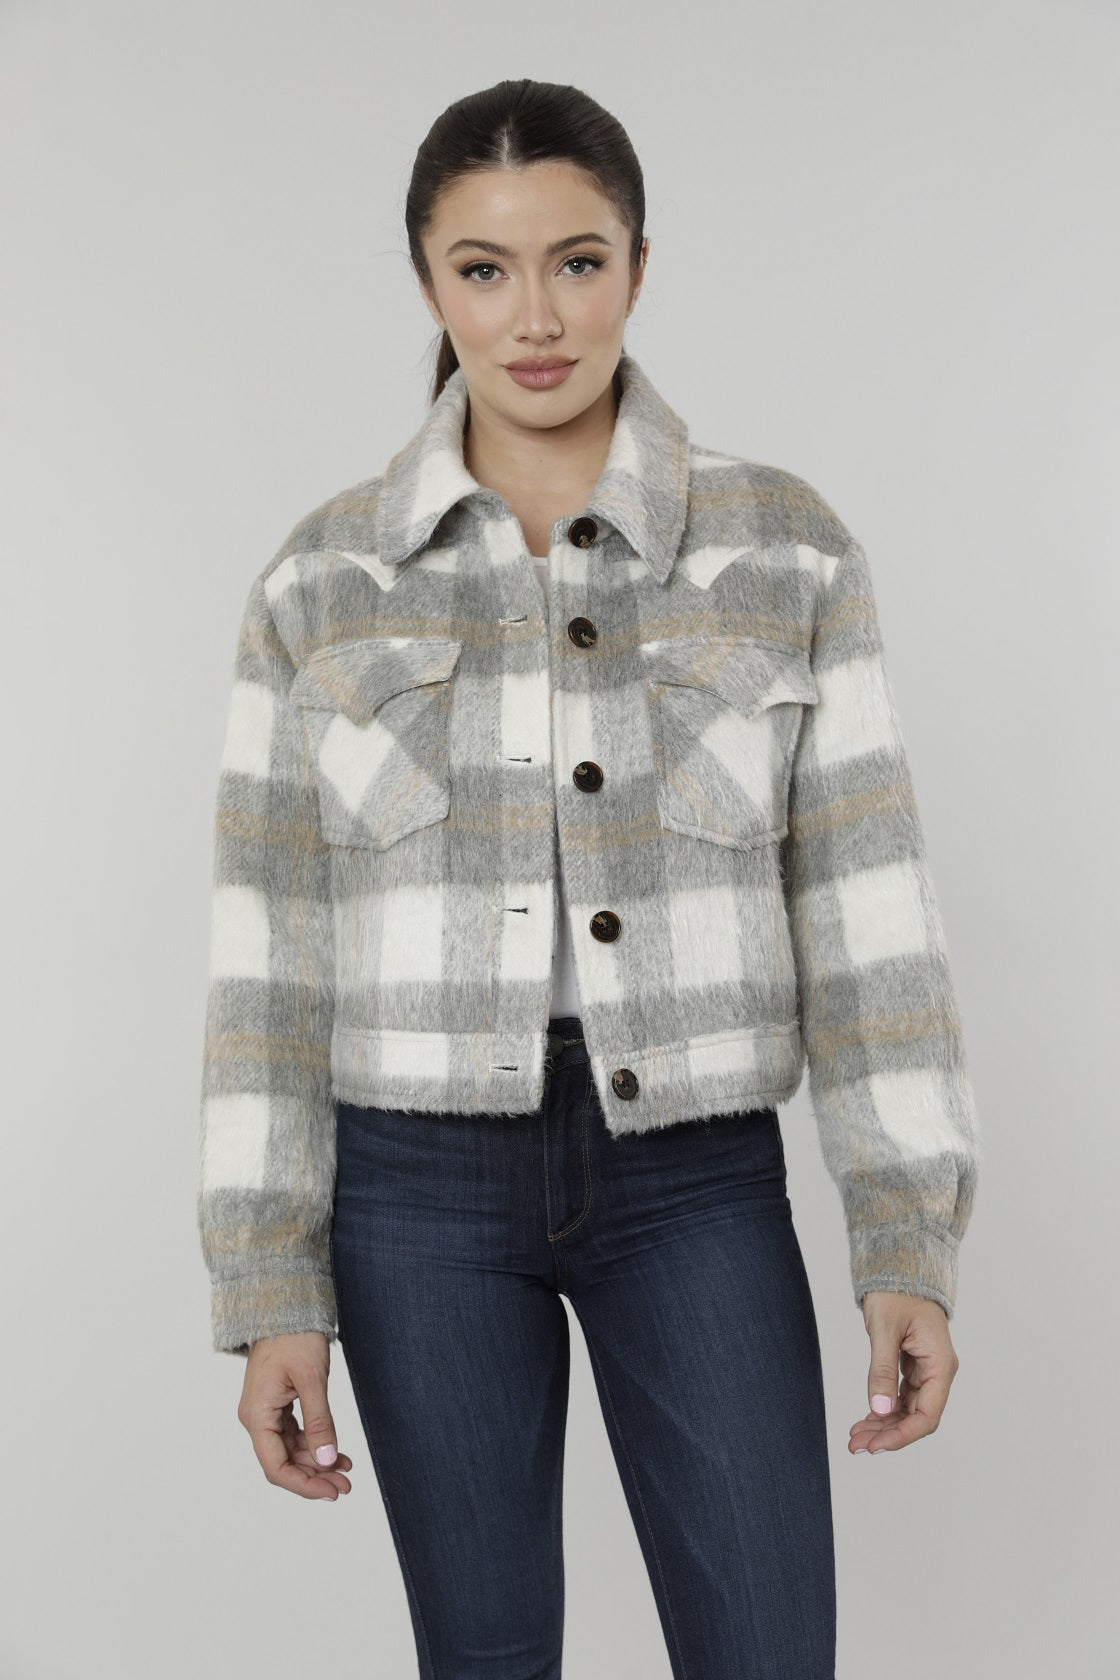 Jackets & Coats, Khaki Plaid Print Button Down Cropped Flannel Cropped  Bomber Jacket Shacket